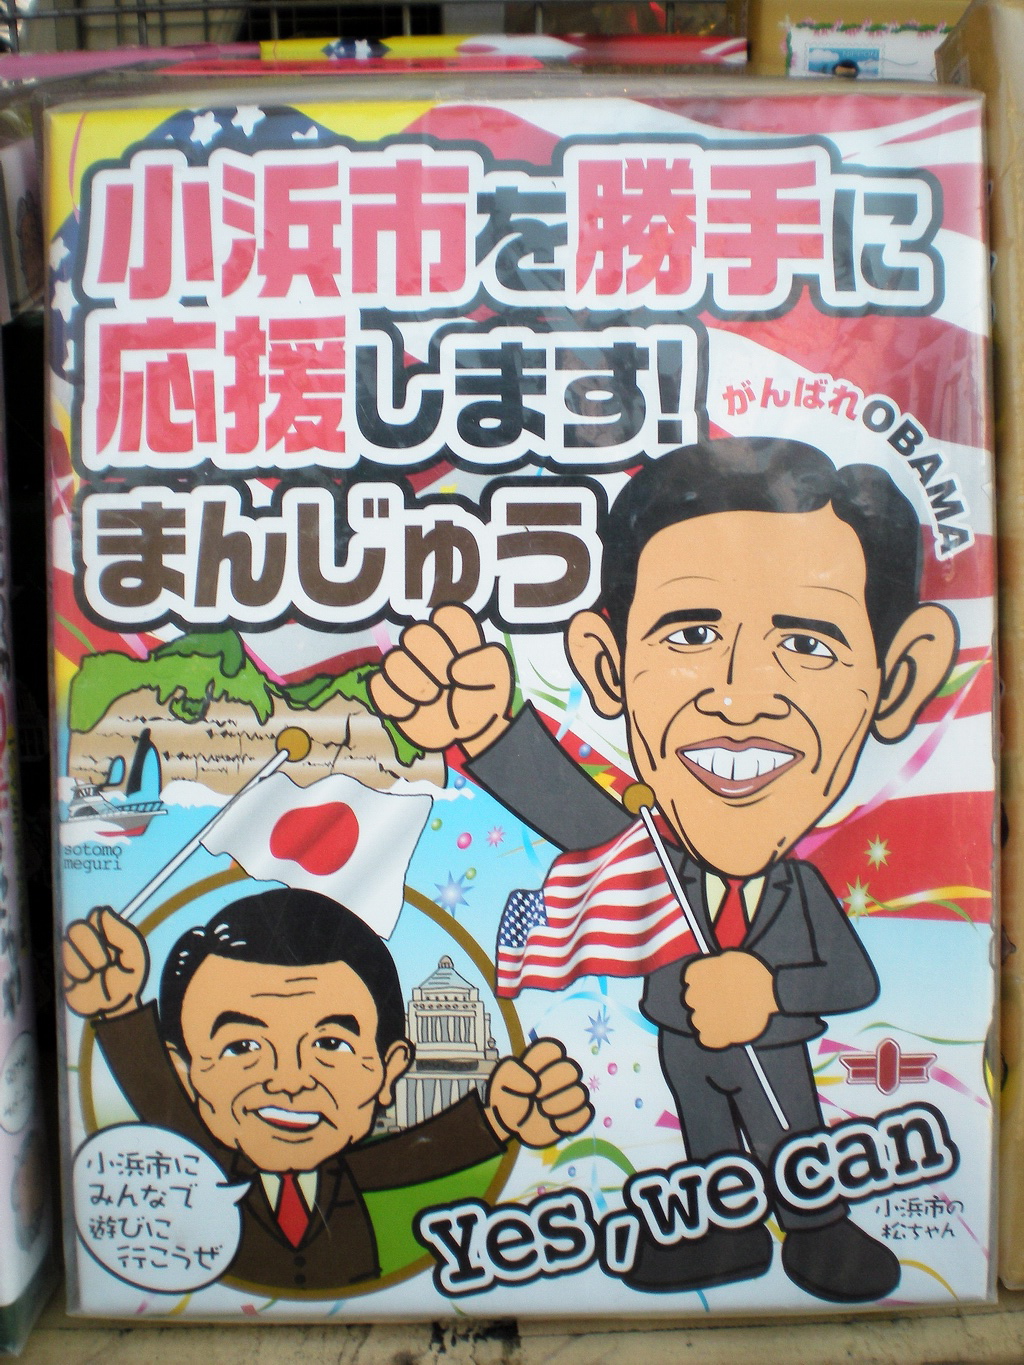 Japanese candy package - they totally love Obama over there!!!
YES WE CAN!!!